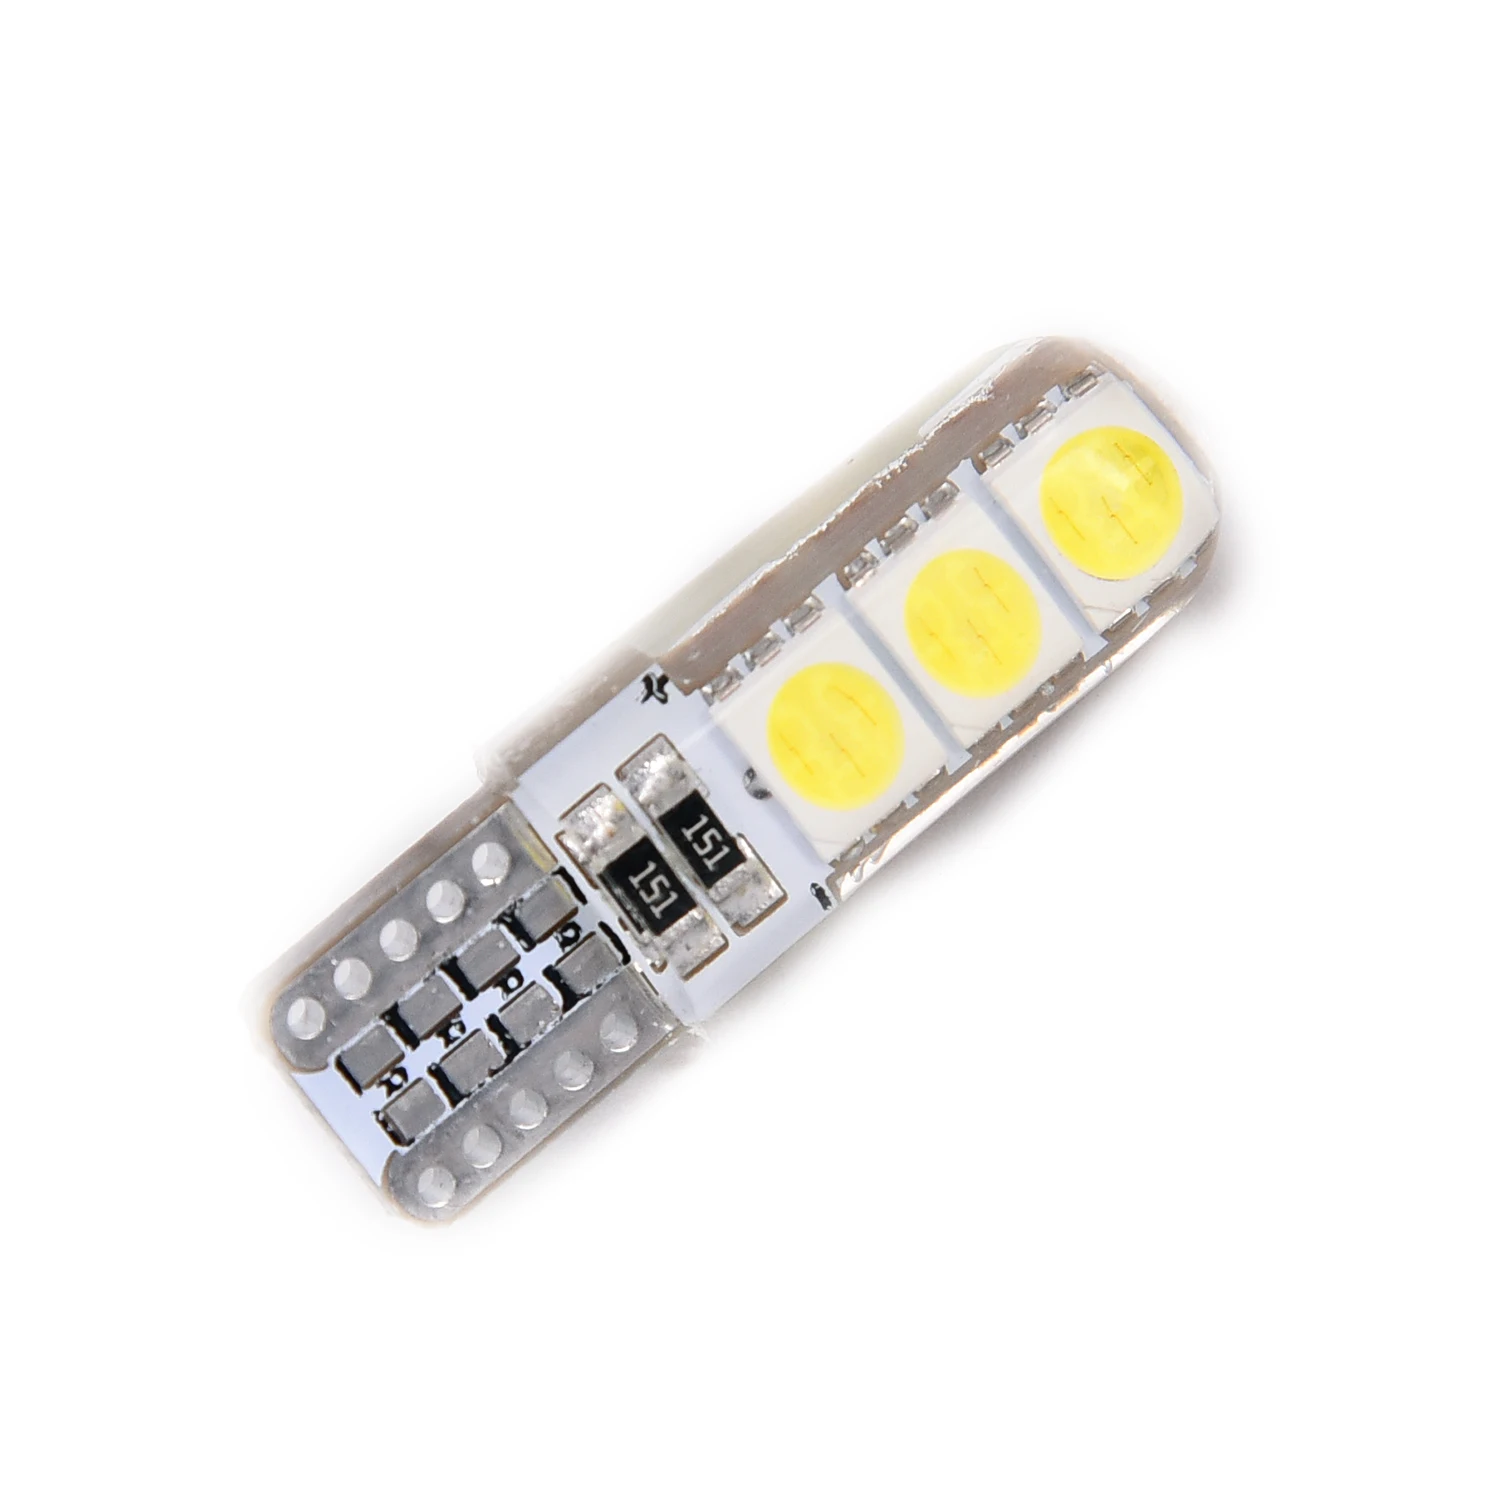 

Silicone Shell Canbus LED Lamp White 12V DC License Plate Dome 10pcs Car T10-5050-6SMD Super Bright Energy Saving